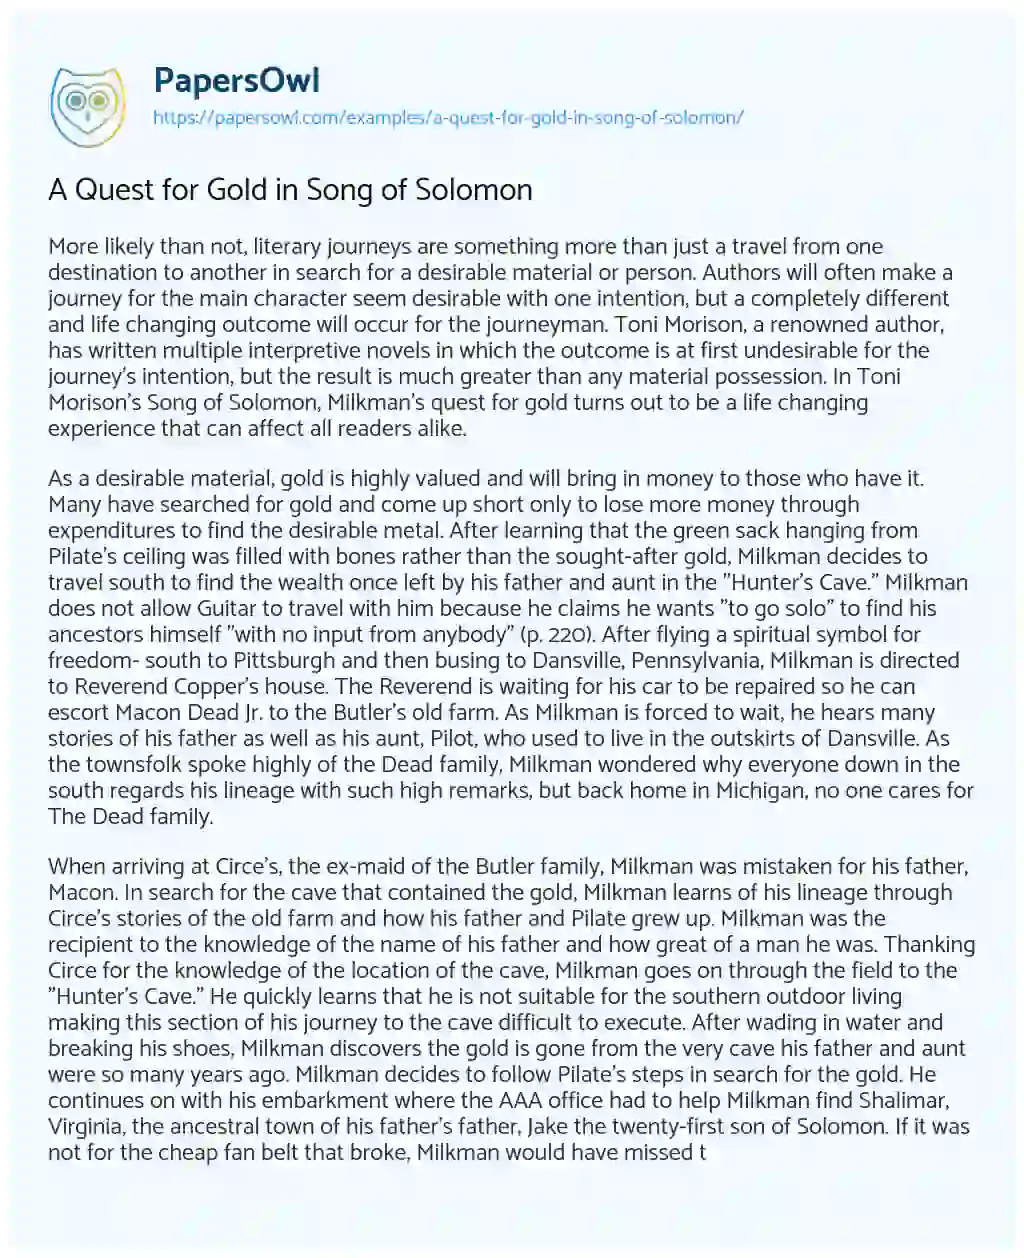 Essay on A Quest for Gold in Song of Solomon